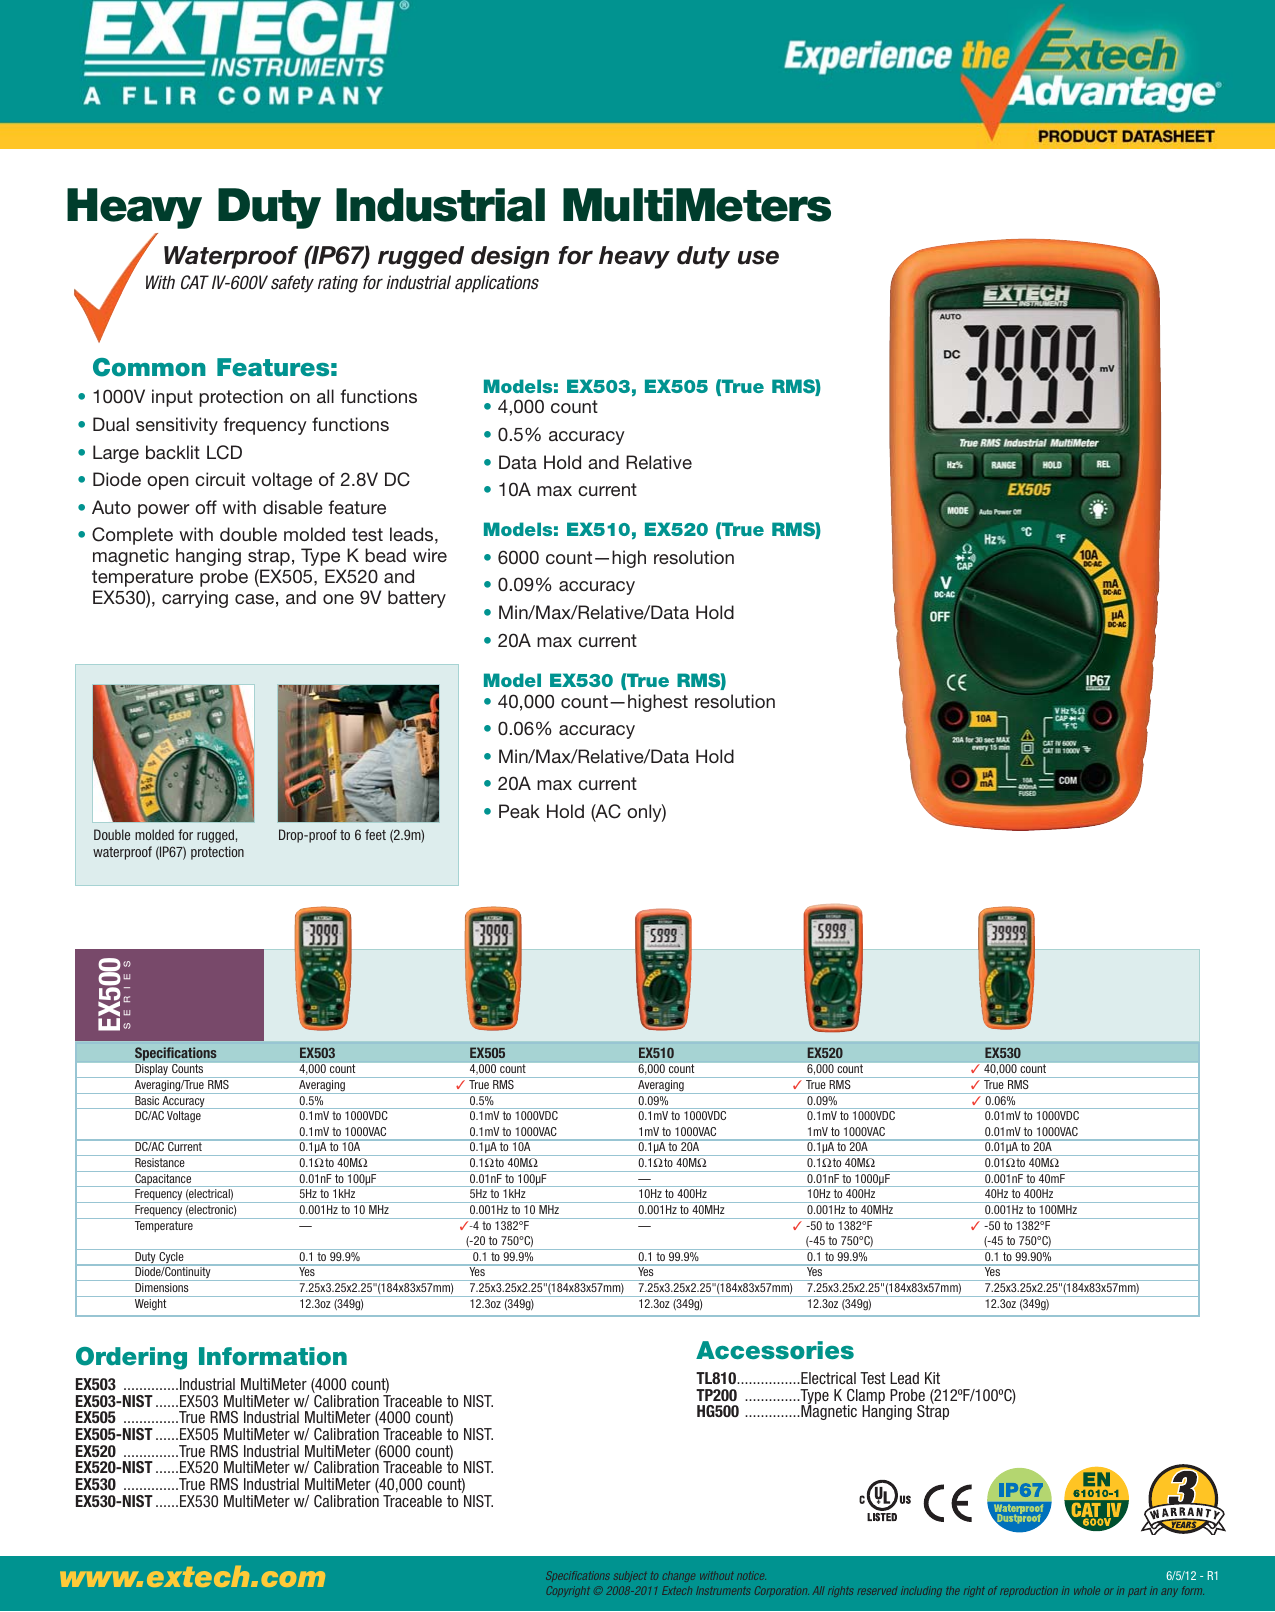 Page 1 of 1 - EX500seriesdata  Brochure